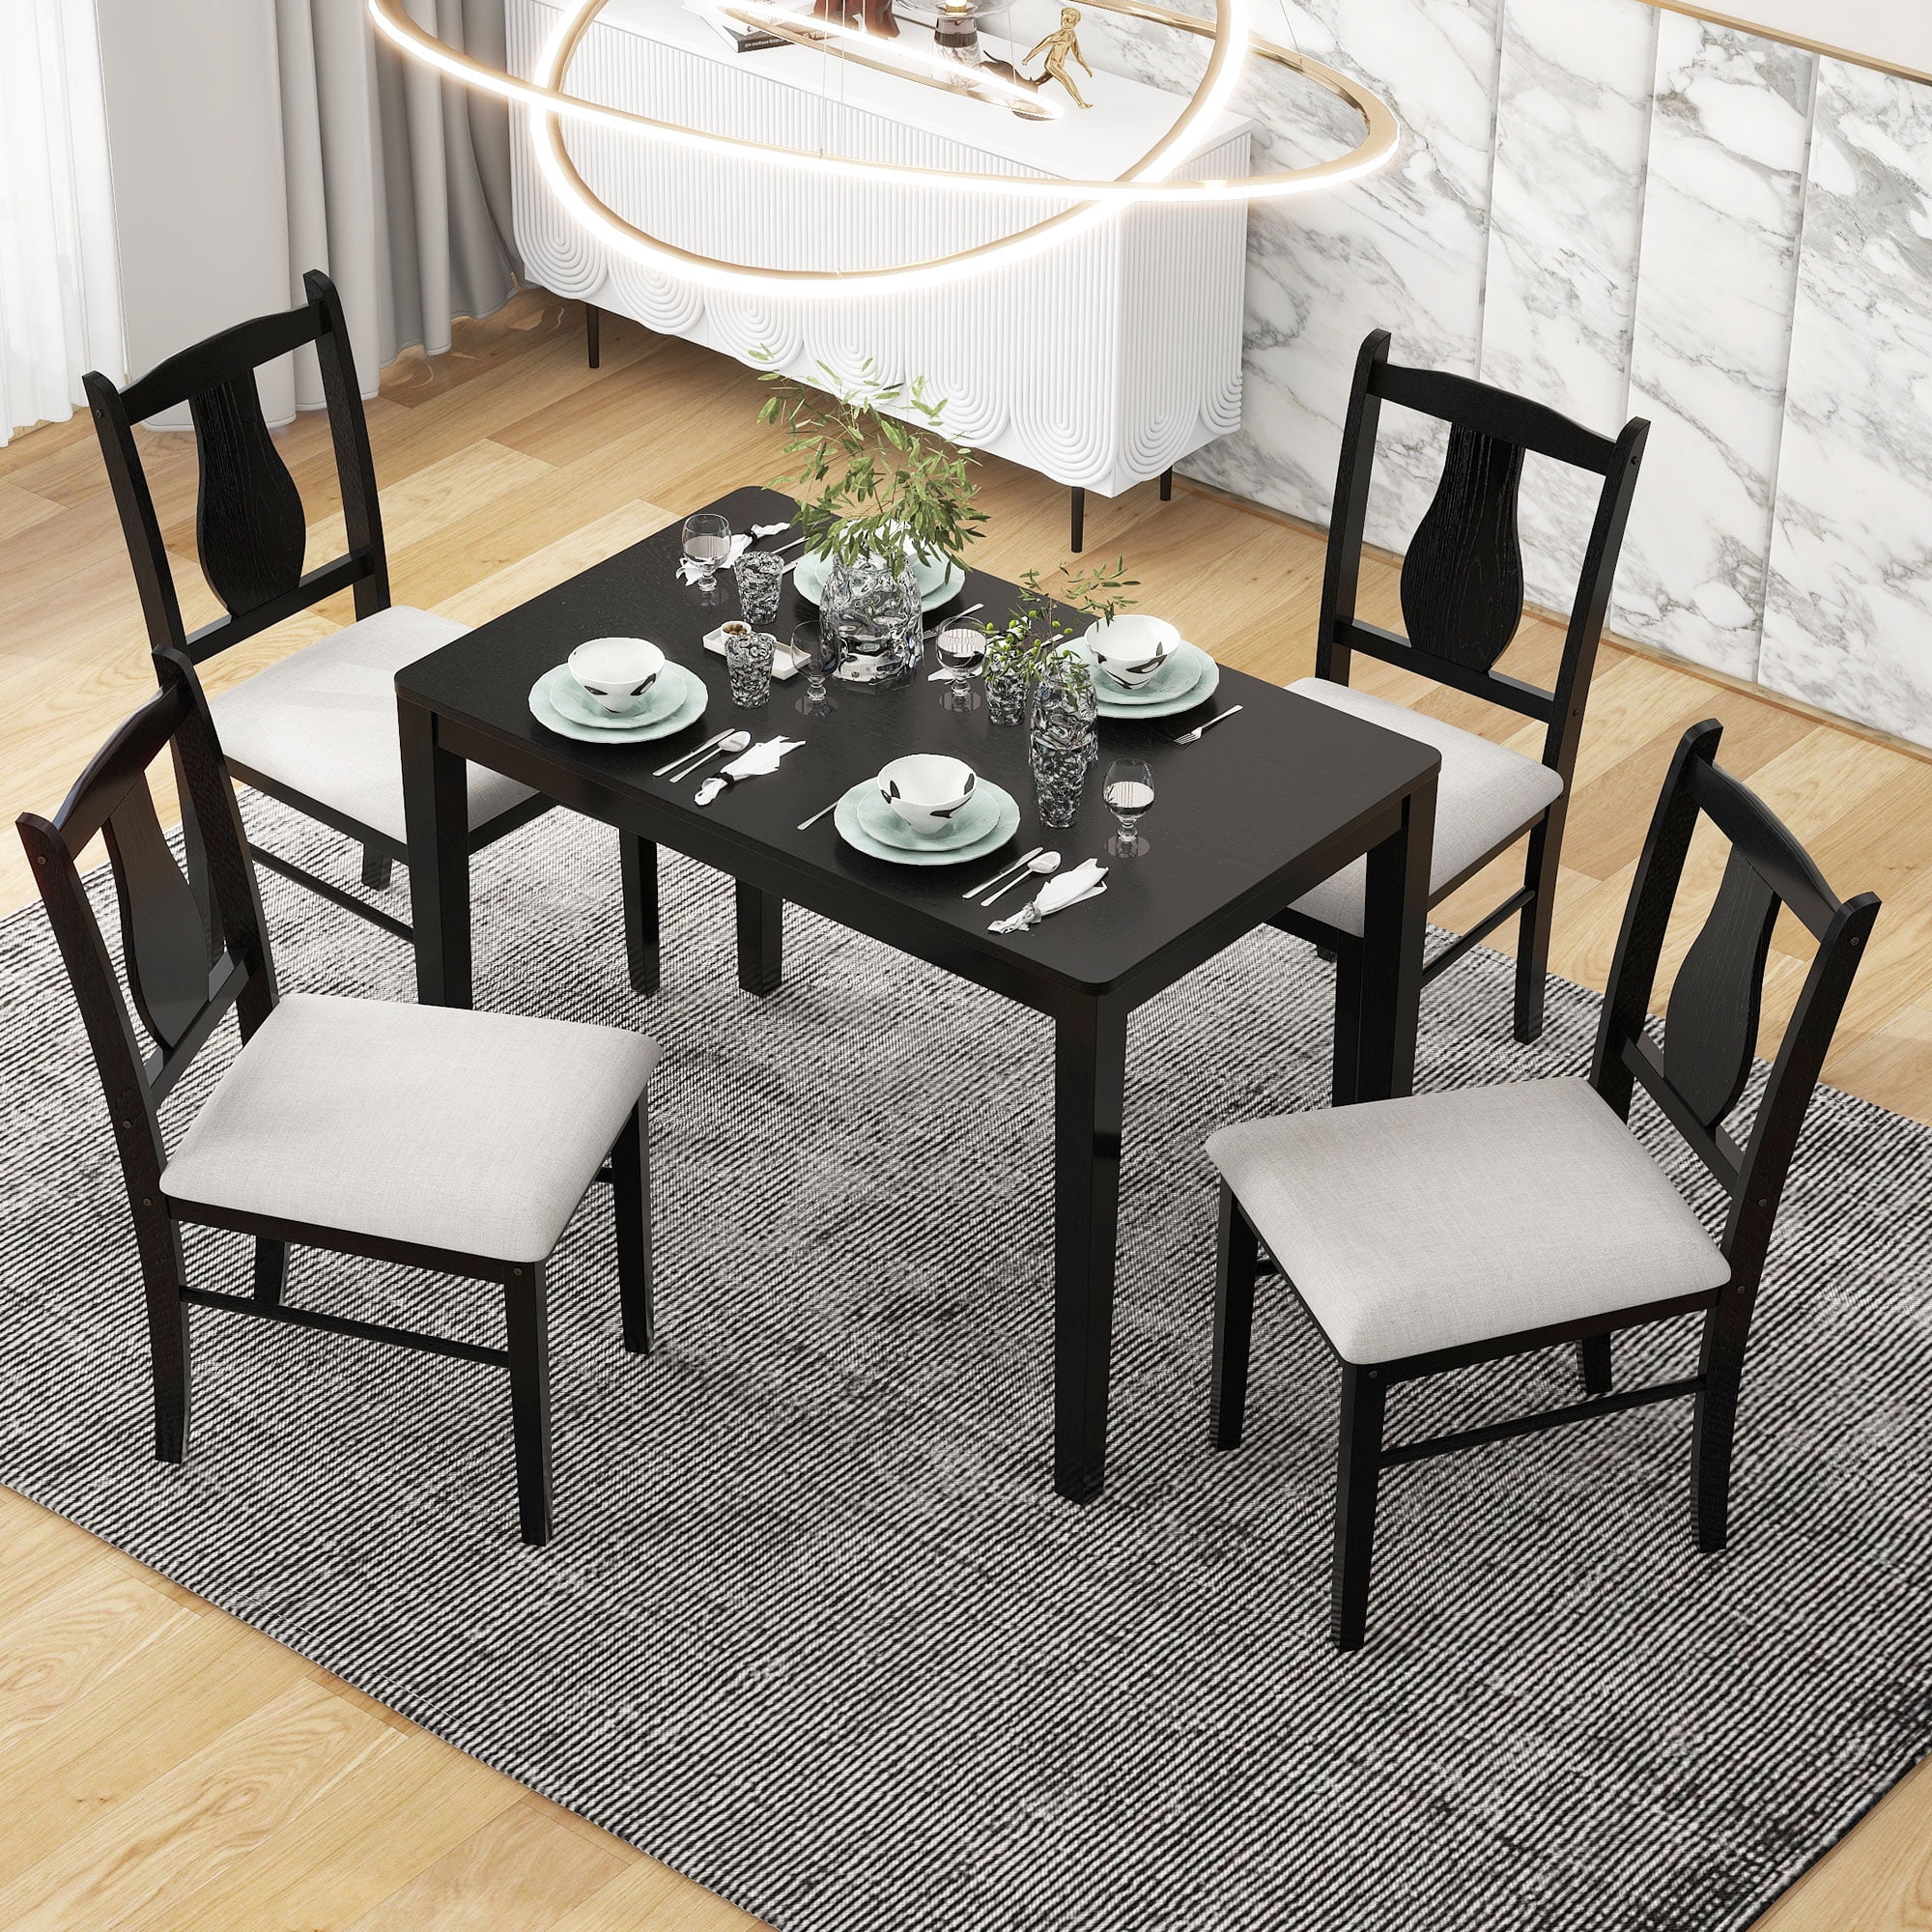 Dining Table Sets for 4, Modern Kitchen Table Set with Upholstered ...